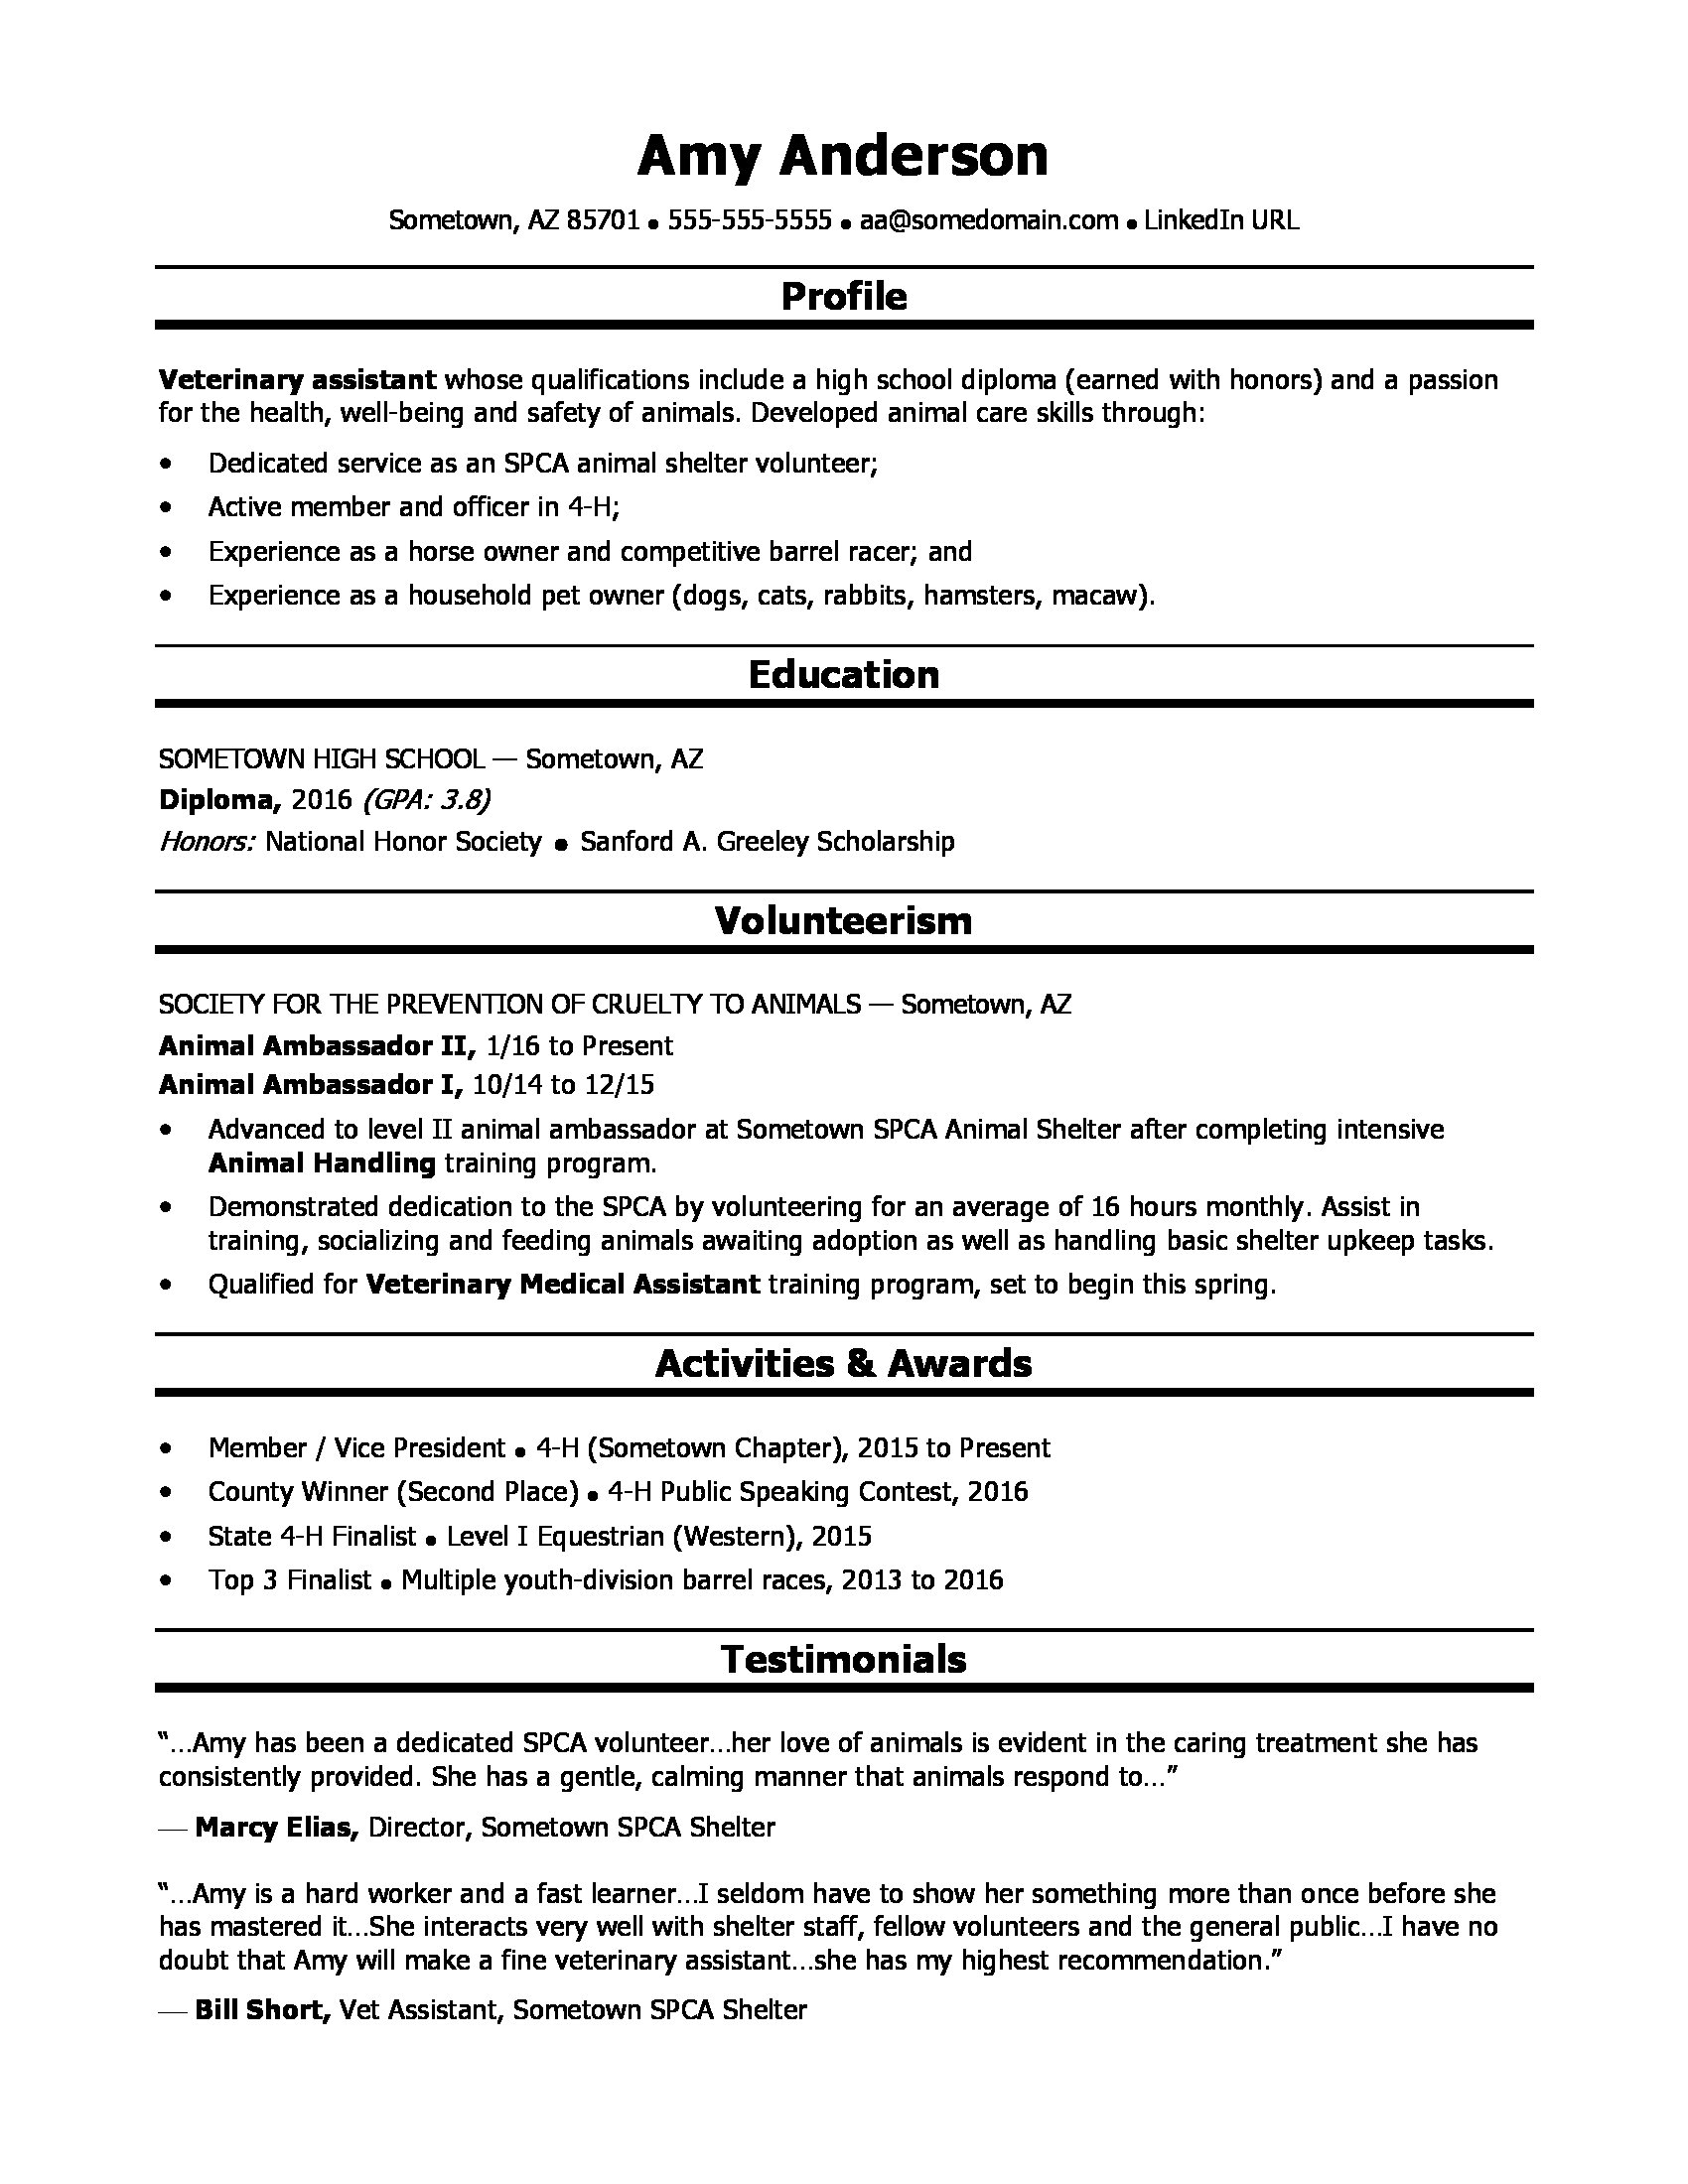 High School Grad Resume Sample  Monster.com Inside High Resume Templates What To Look For